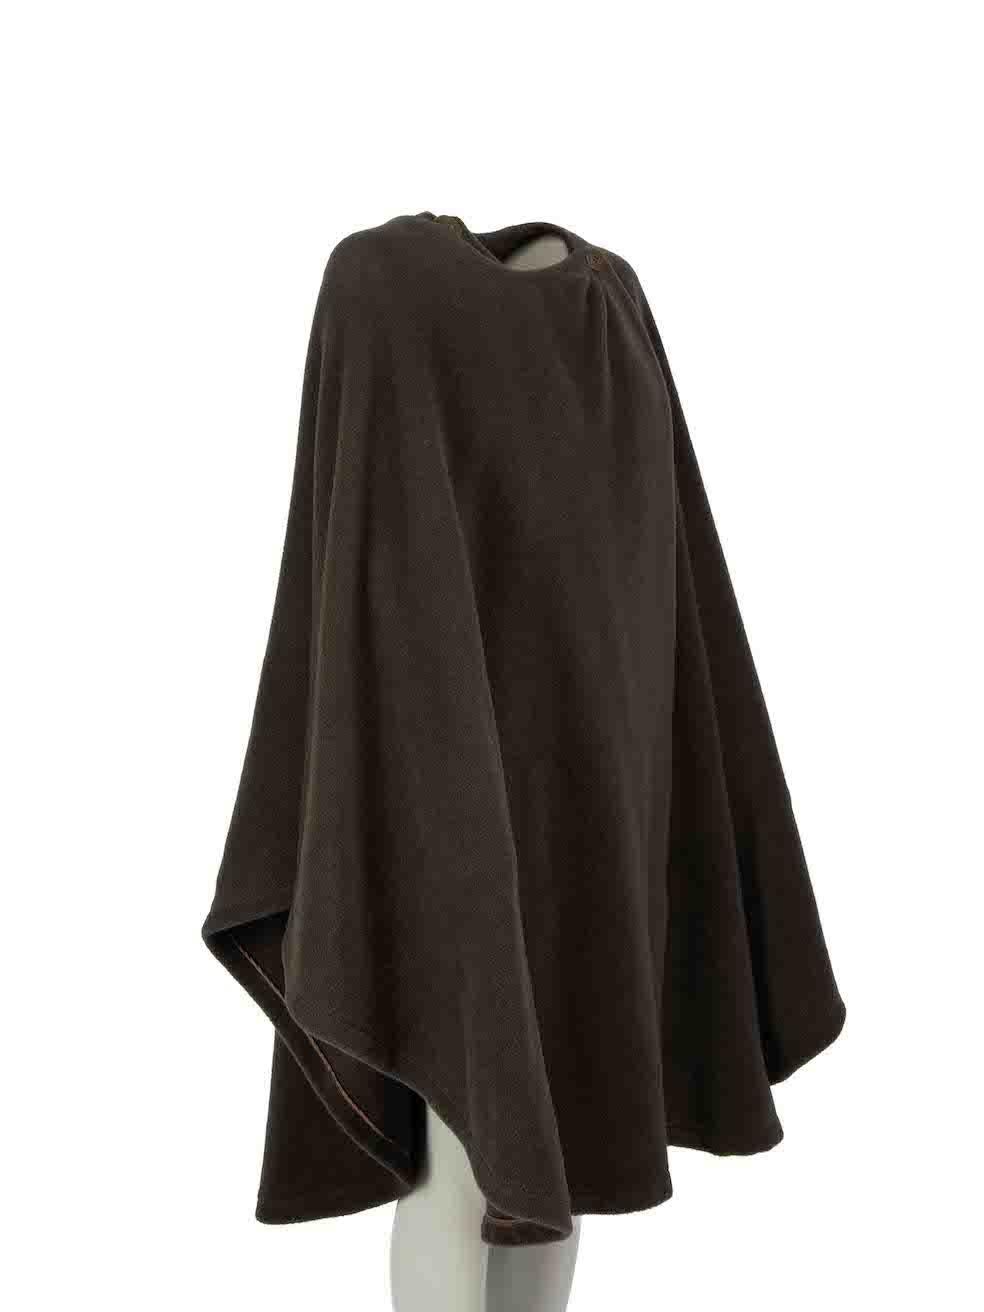 CONDITION is Good. Minor wear to cape is evident. Light wear to internal stitching with a number of stray thread ends found through the centre front lining and along neckline on this used Armani designer resale item.
 
Details
Khaki
Wool
Cape
Button